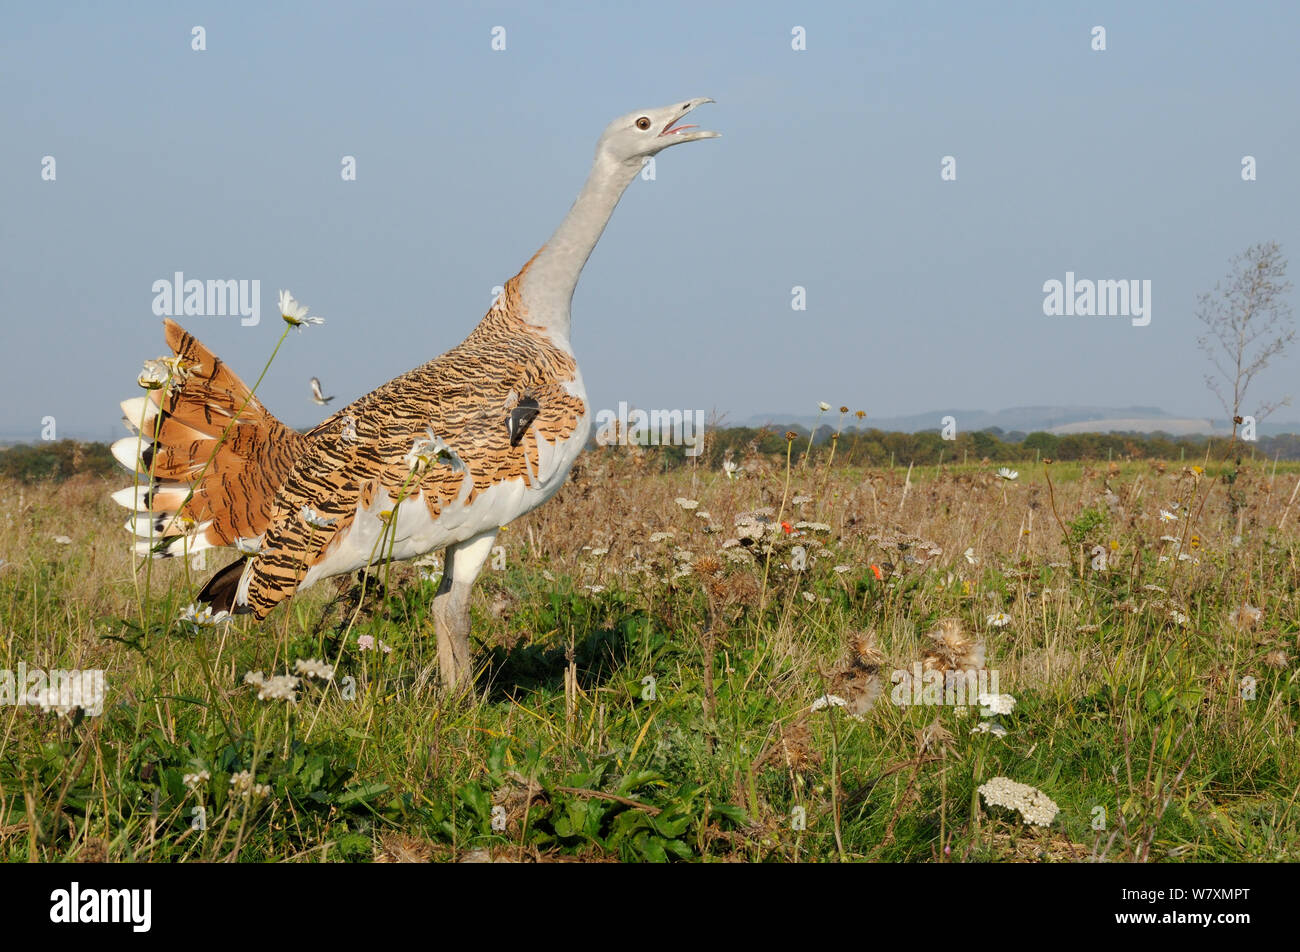 Low wide angle close up of an adult male Great Bustard (Otis tarda) calling, with another flying in the background. Part of reintroduction project of birds from Russia. Salisbury Plain, Wiltshire, UK, September. Stock Photo